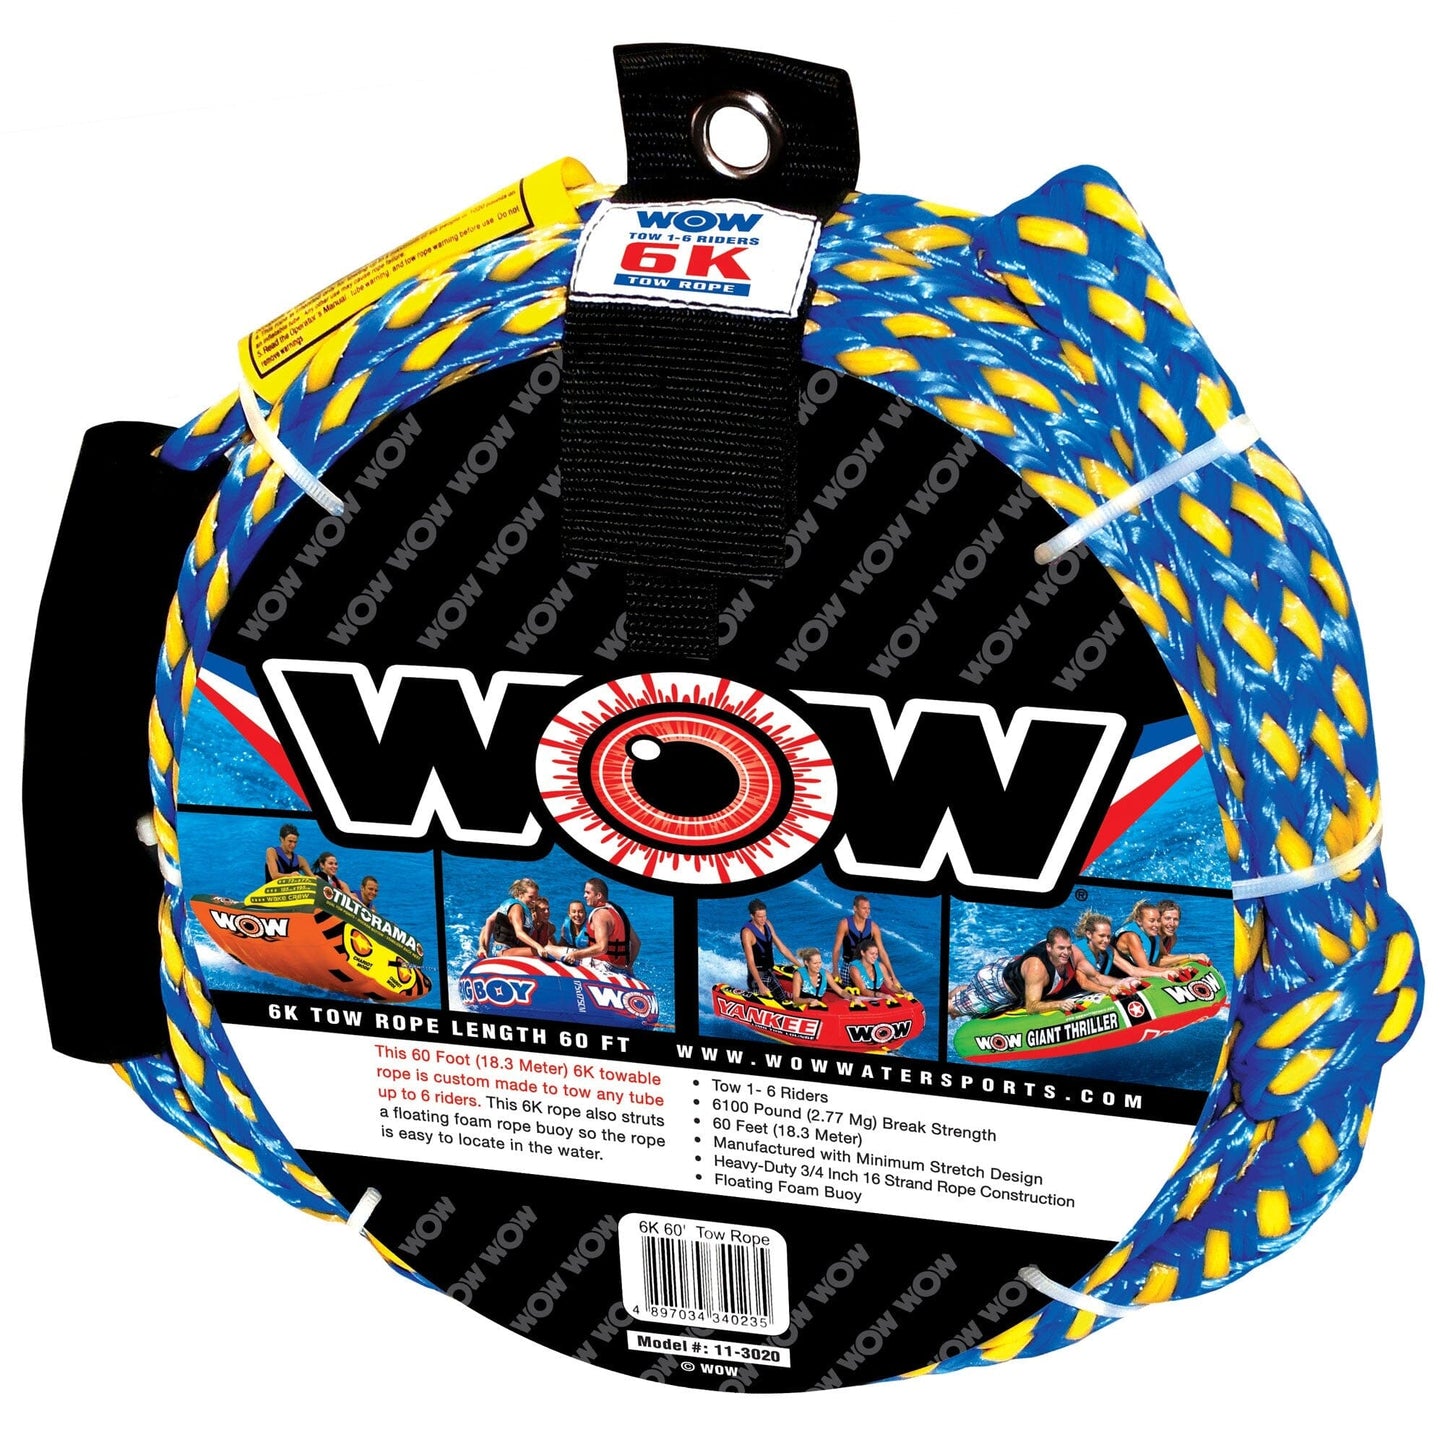 6K 60' Tow Rope